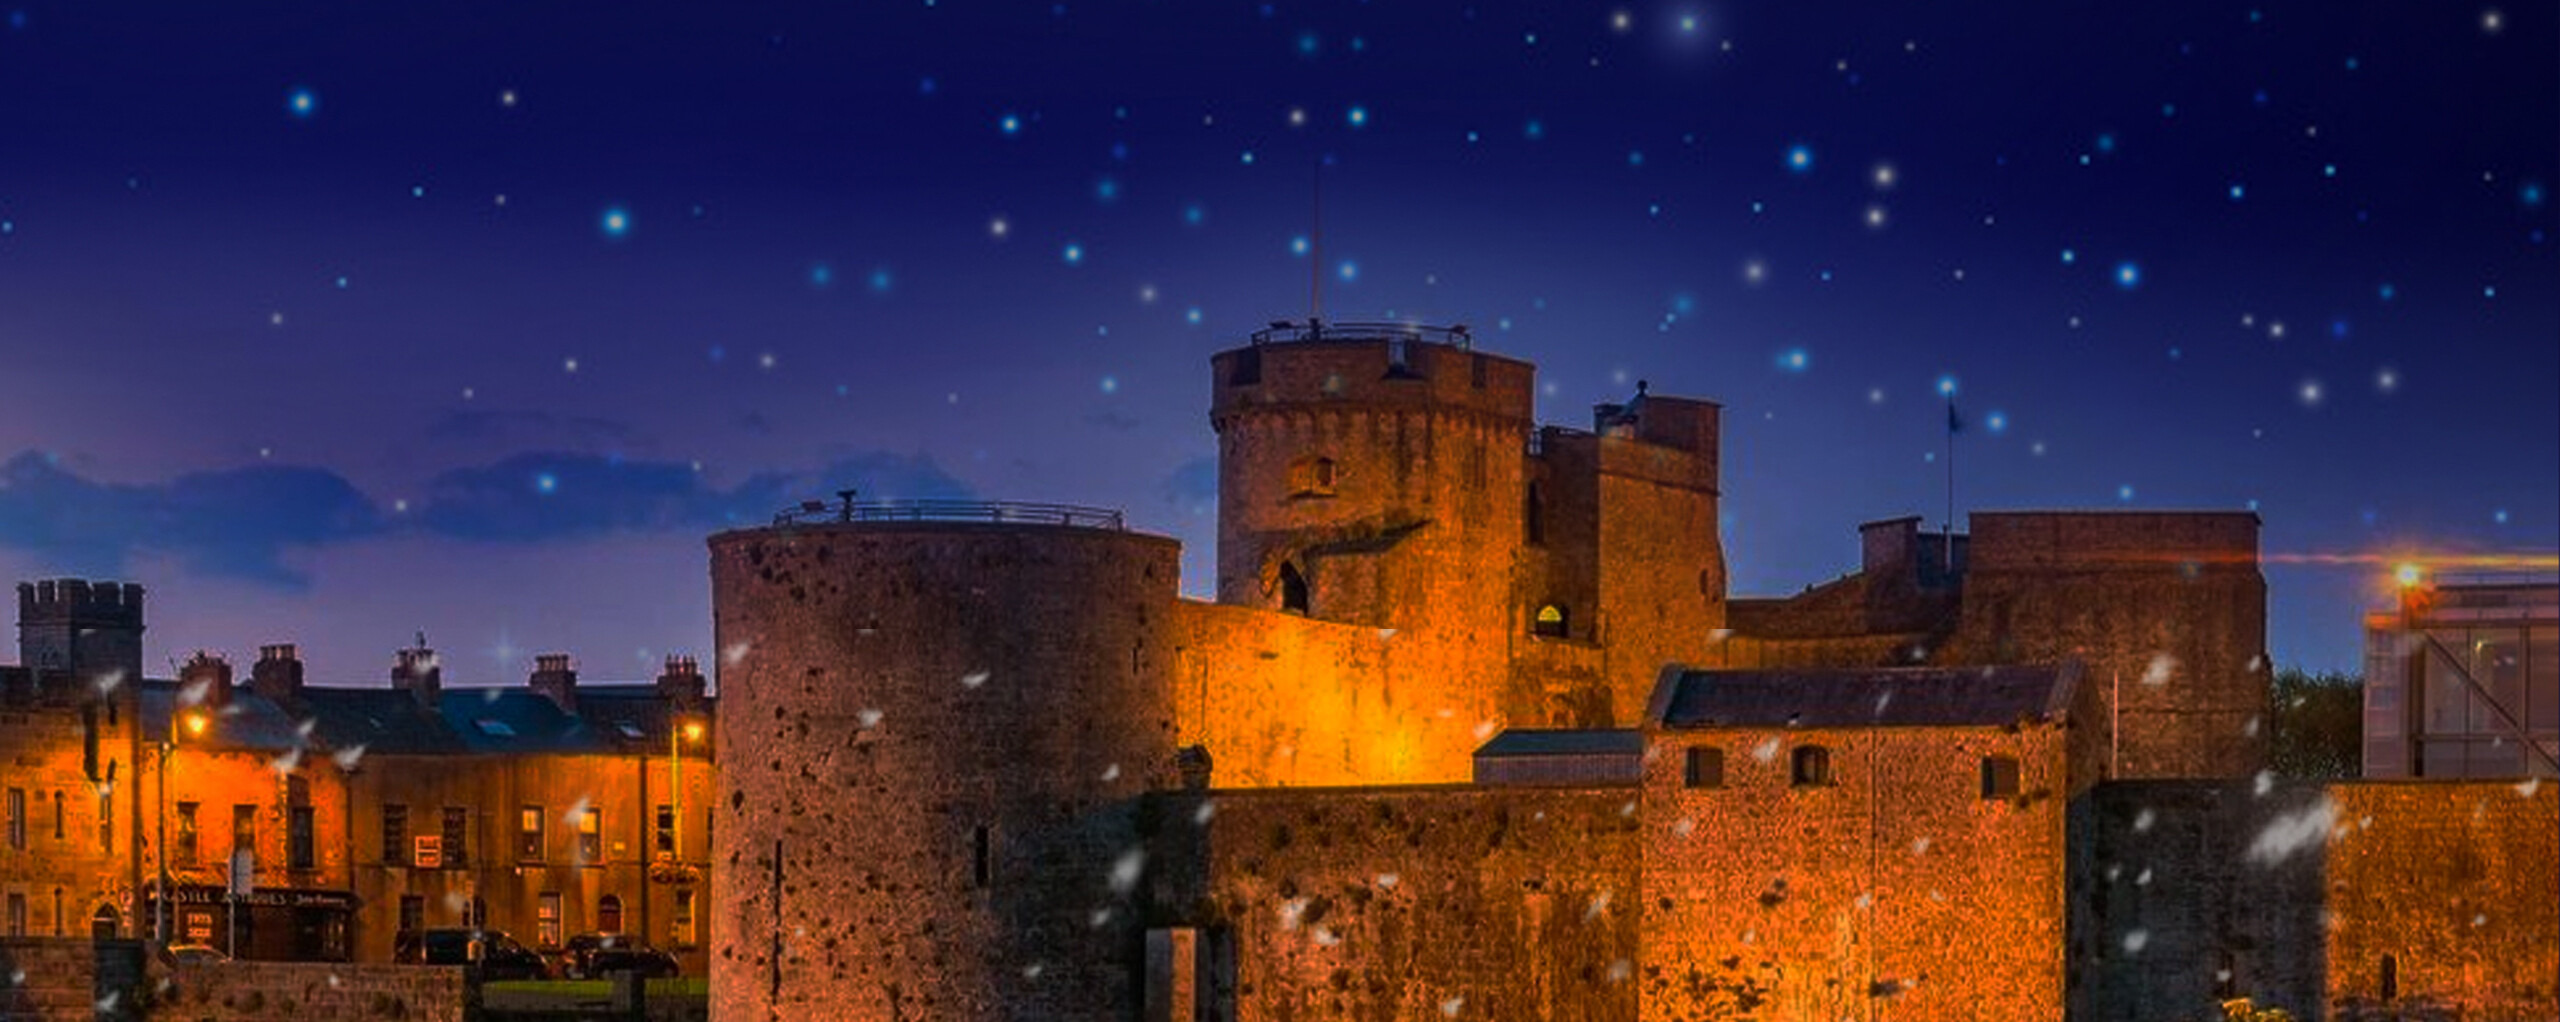 Spend an enchanted evening at King Johns Castle this Christmas